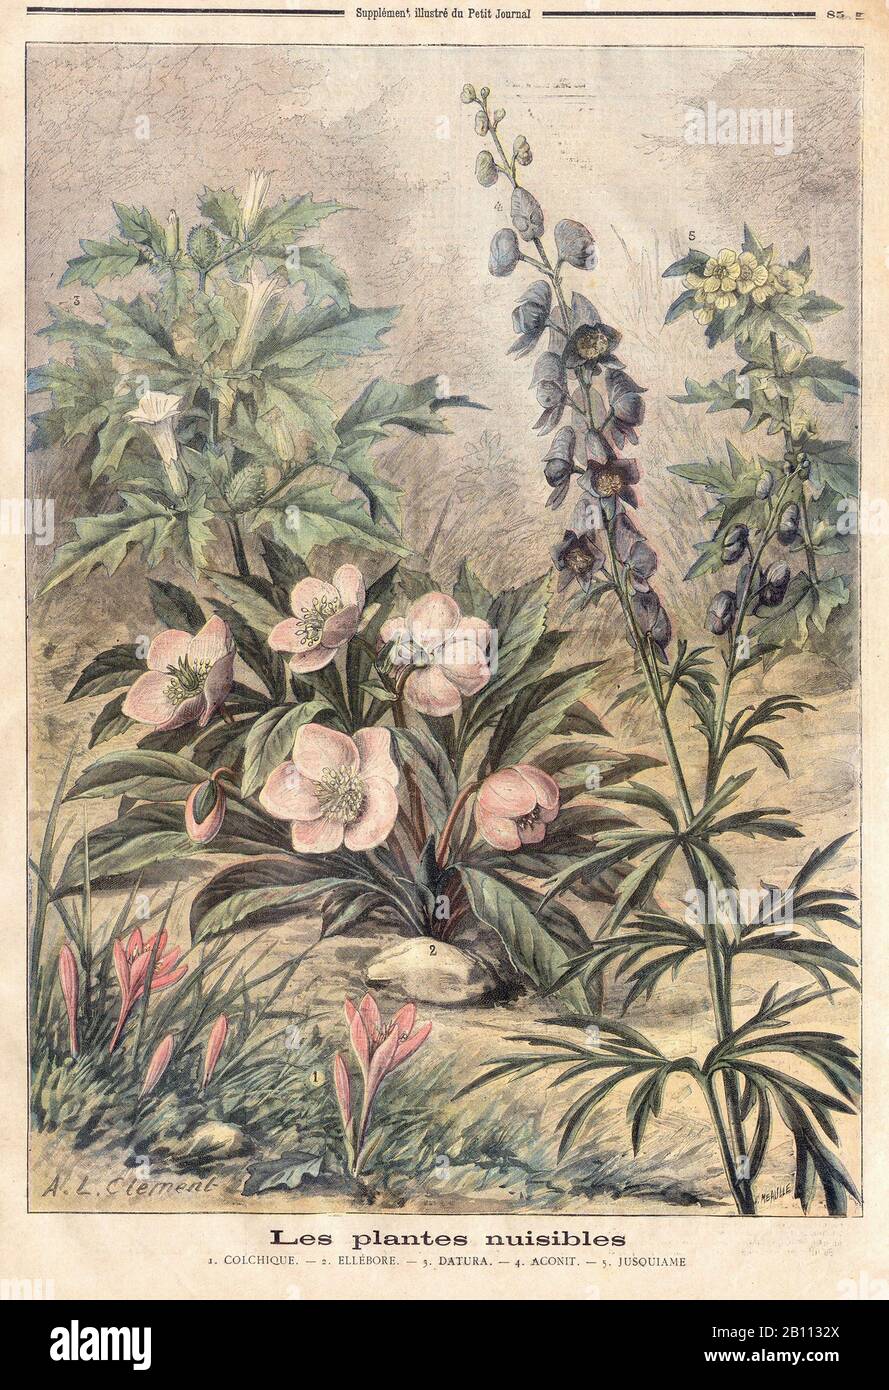 Les plantes nuisibles J. COLCHIQUE. — 2. ELLÉBORE. DATURA. — 4. ACONIT. — JUSQUIAME - In 'Le Petit Journal' French Illustrated newspaper - Stock Photo